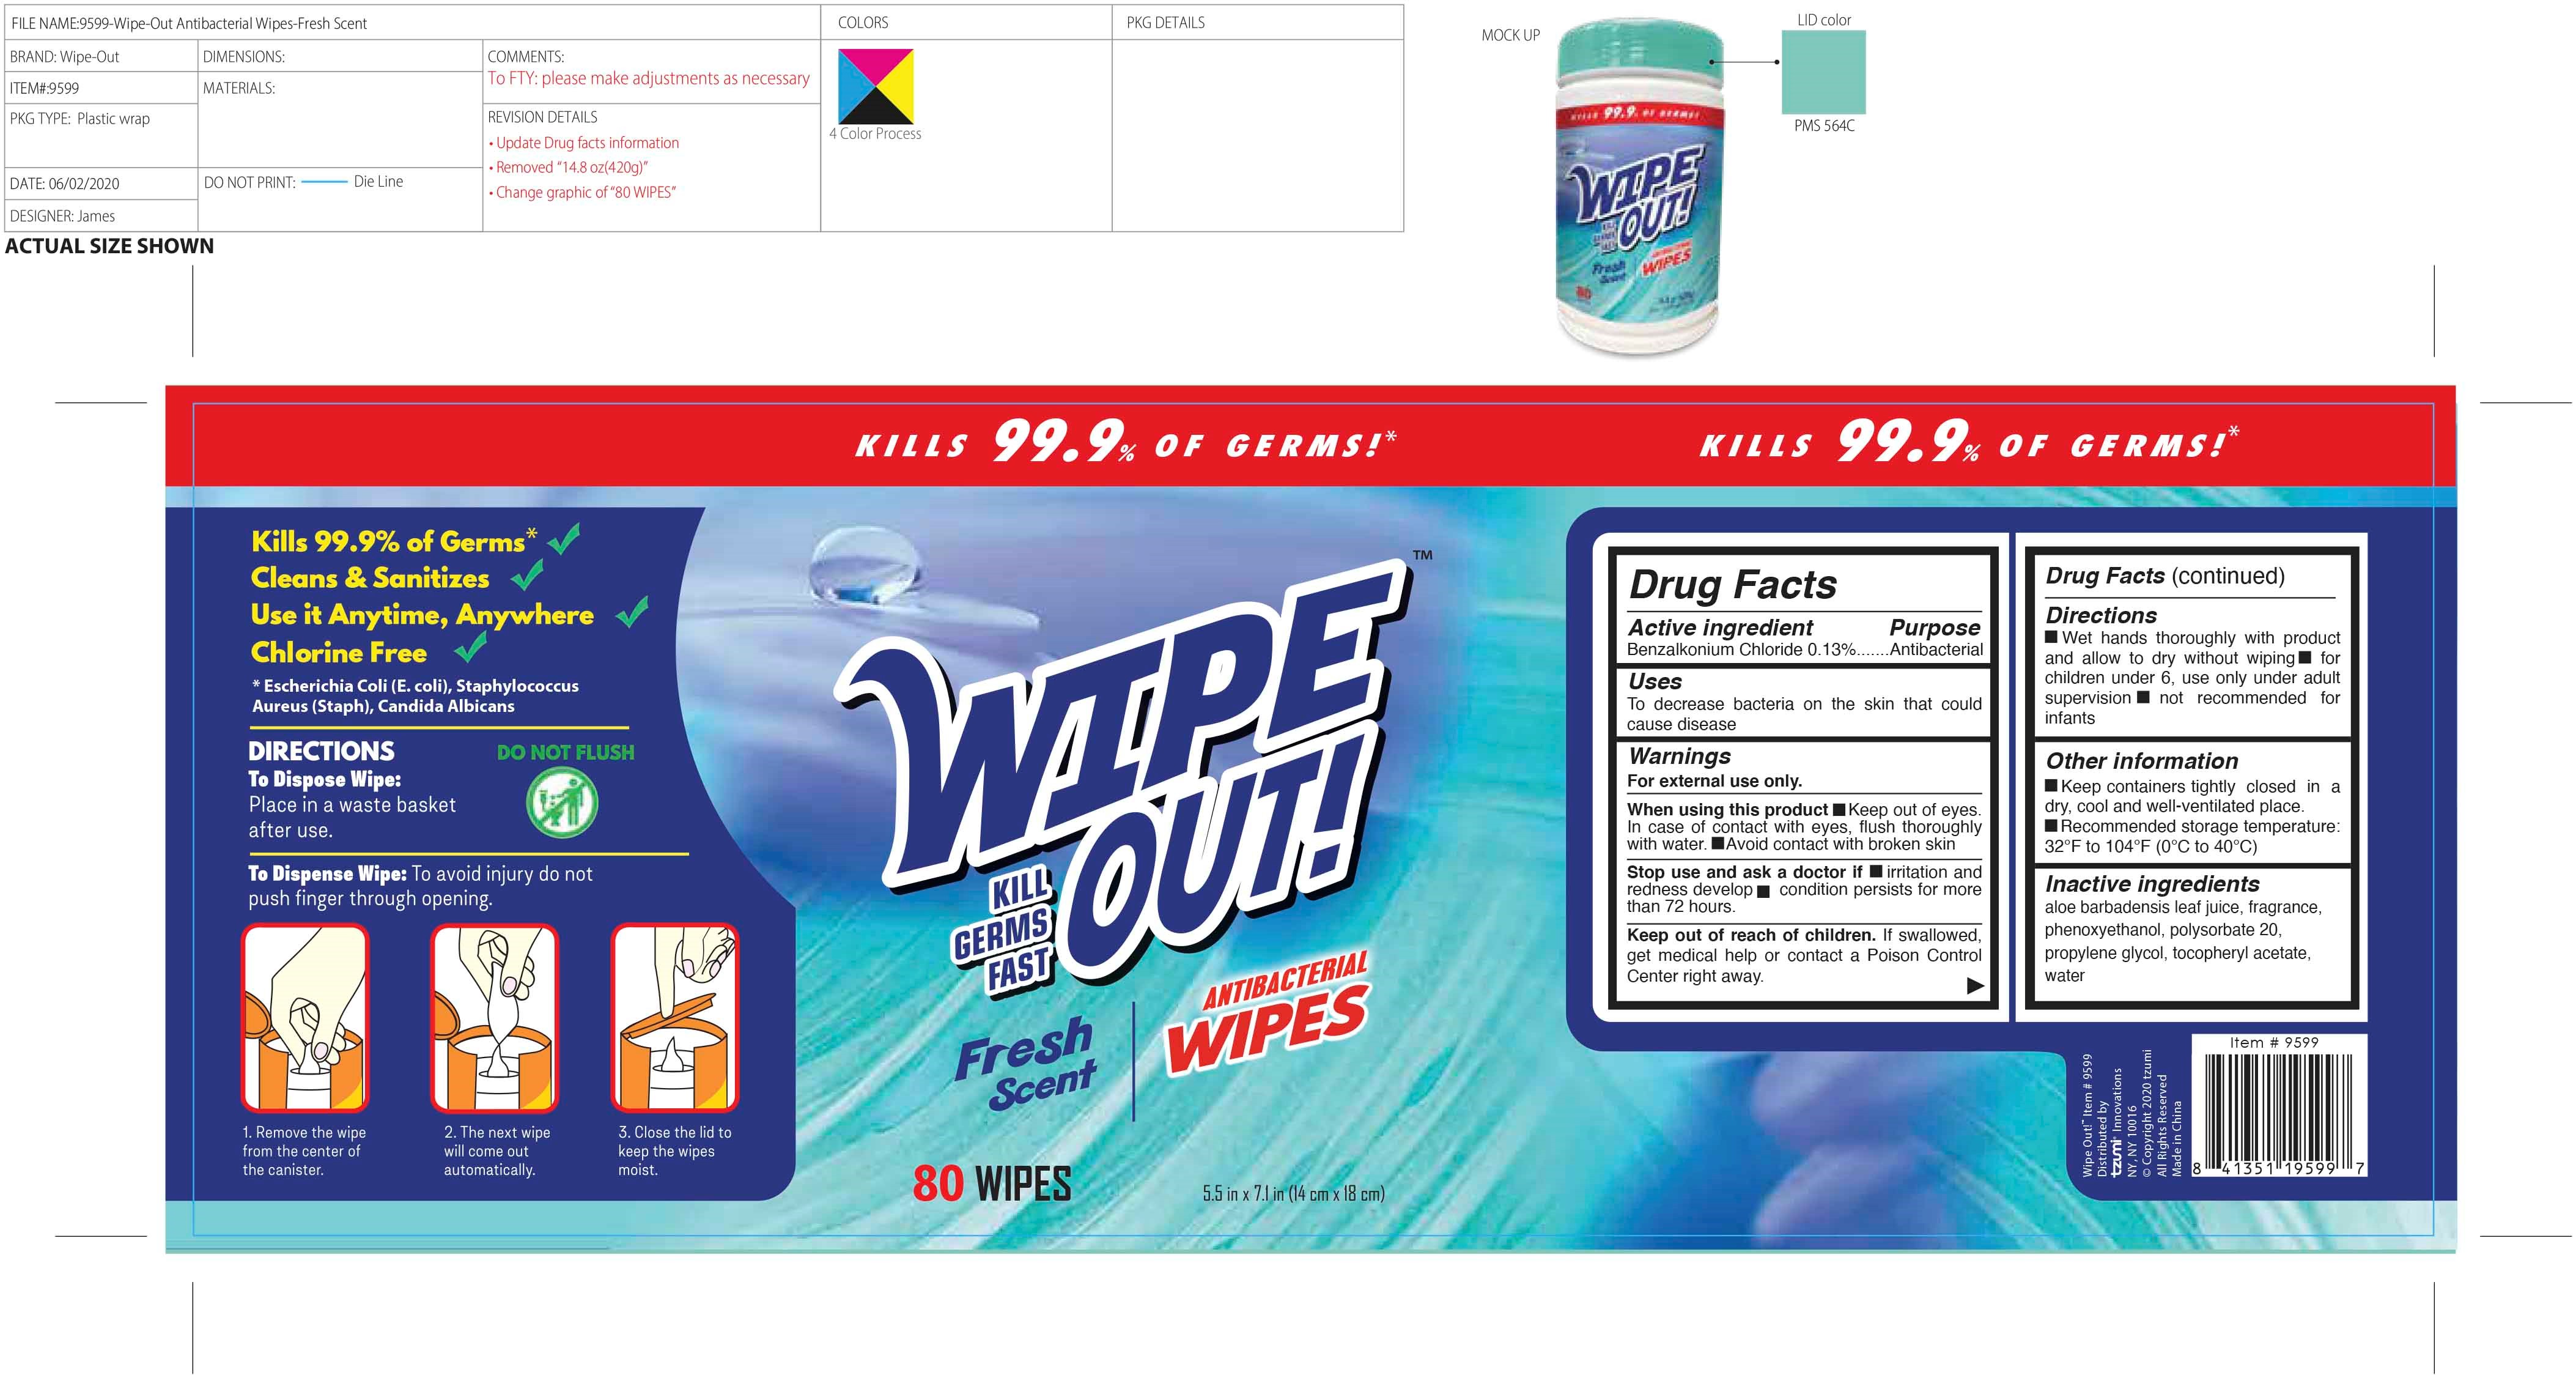 WIPE OUT ANTIBACTERIAL WIPES FRESH SCENT- benzalkonium chloride